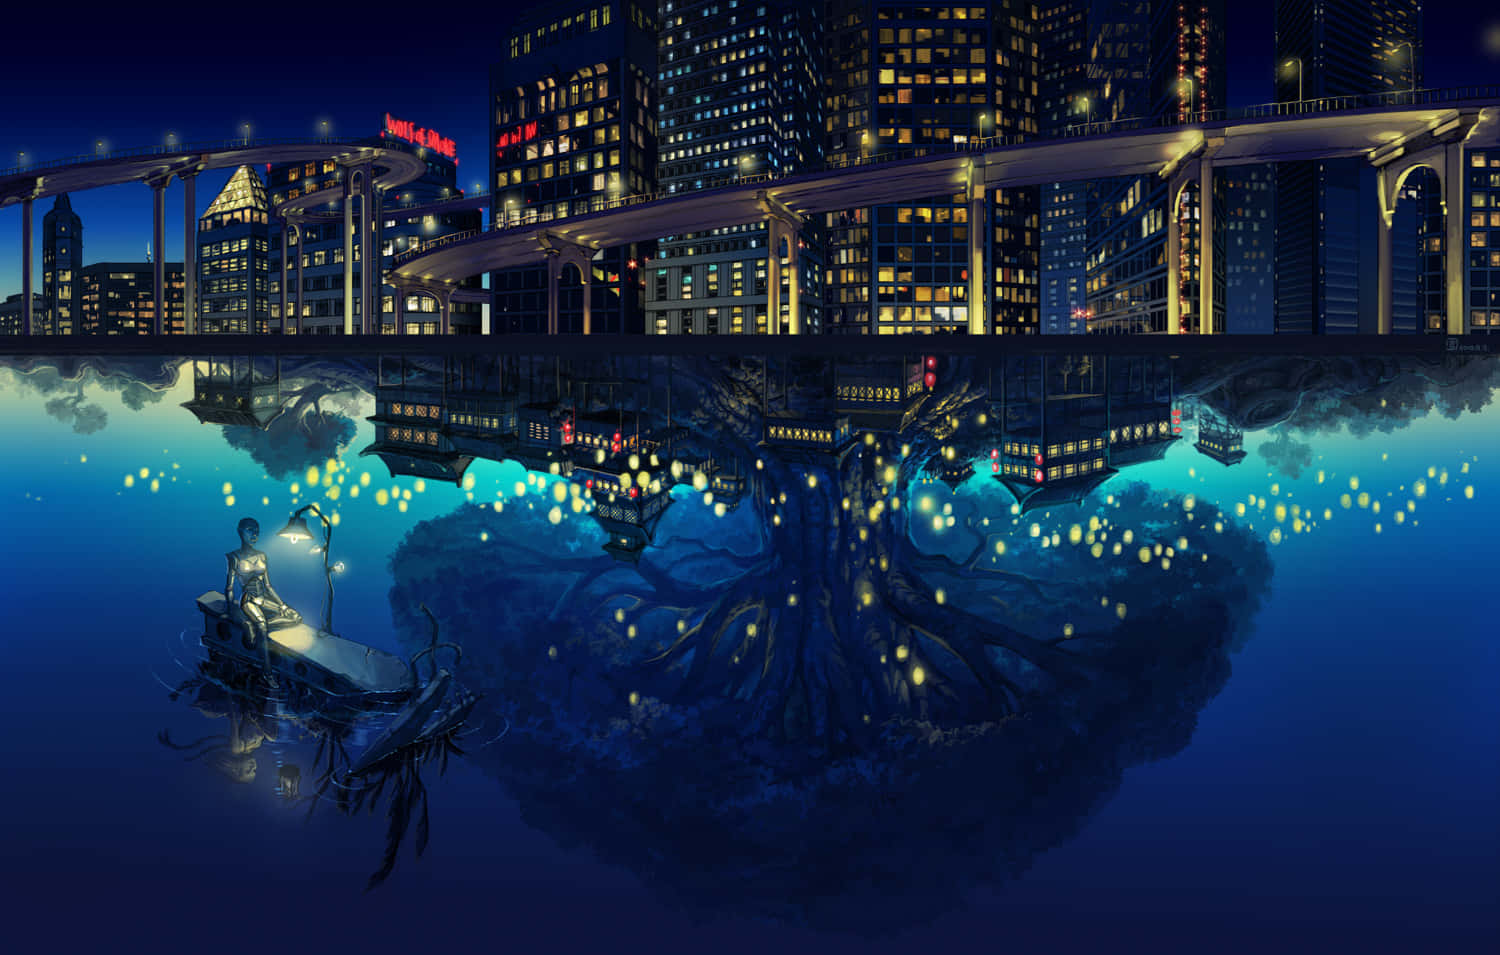 Night Anime River Reflects The City Wallpaper